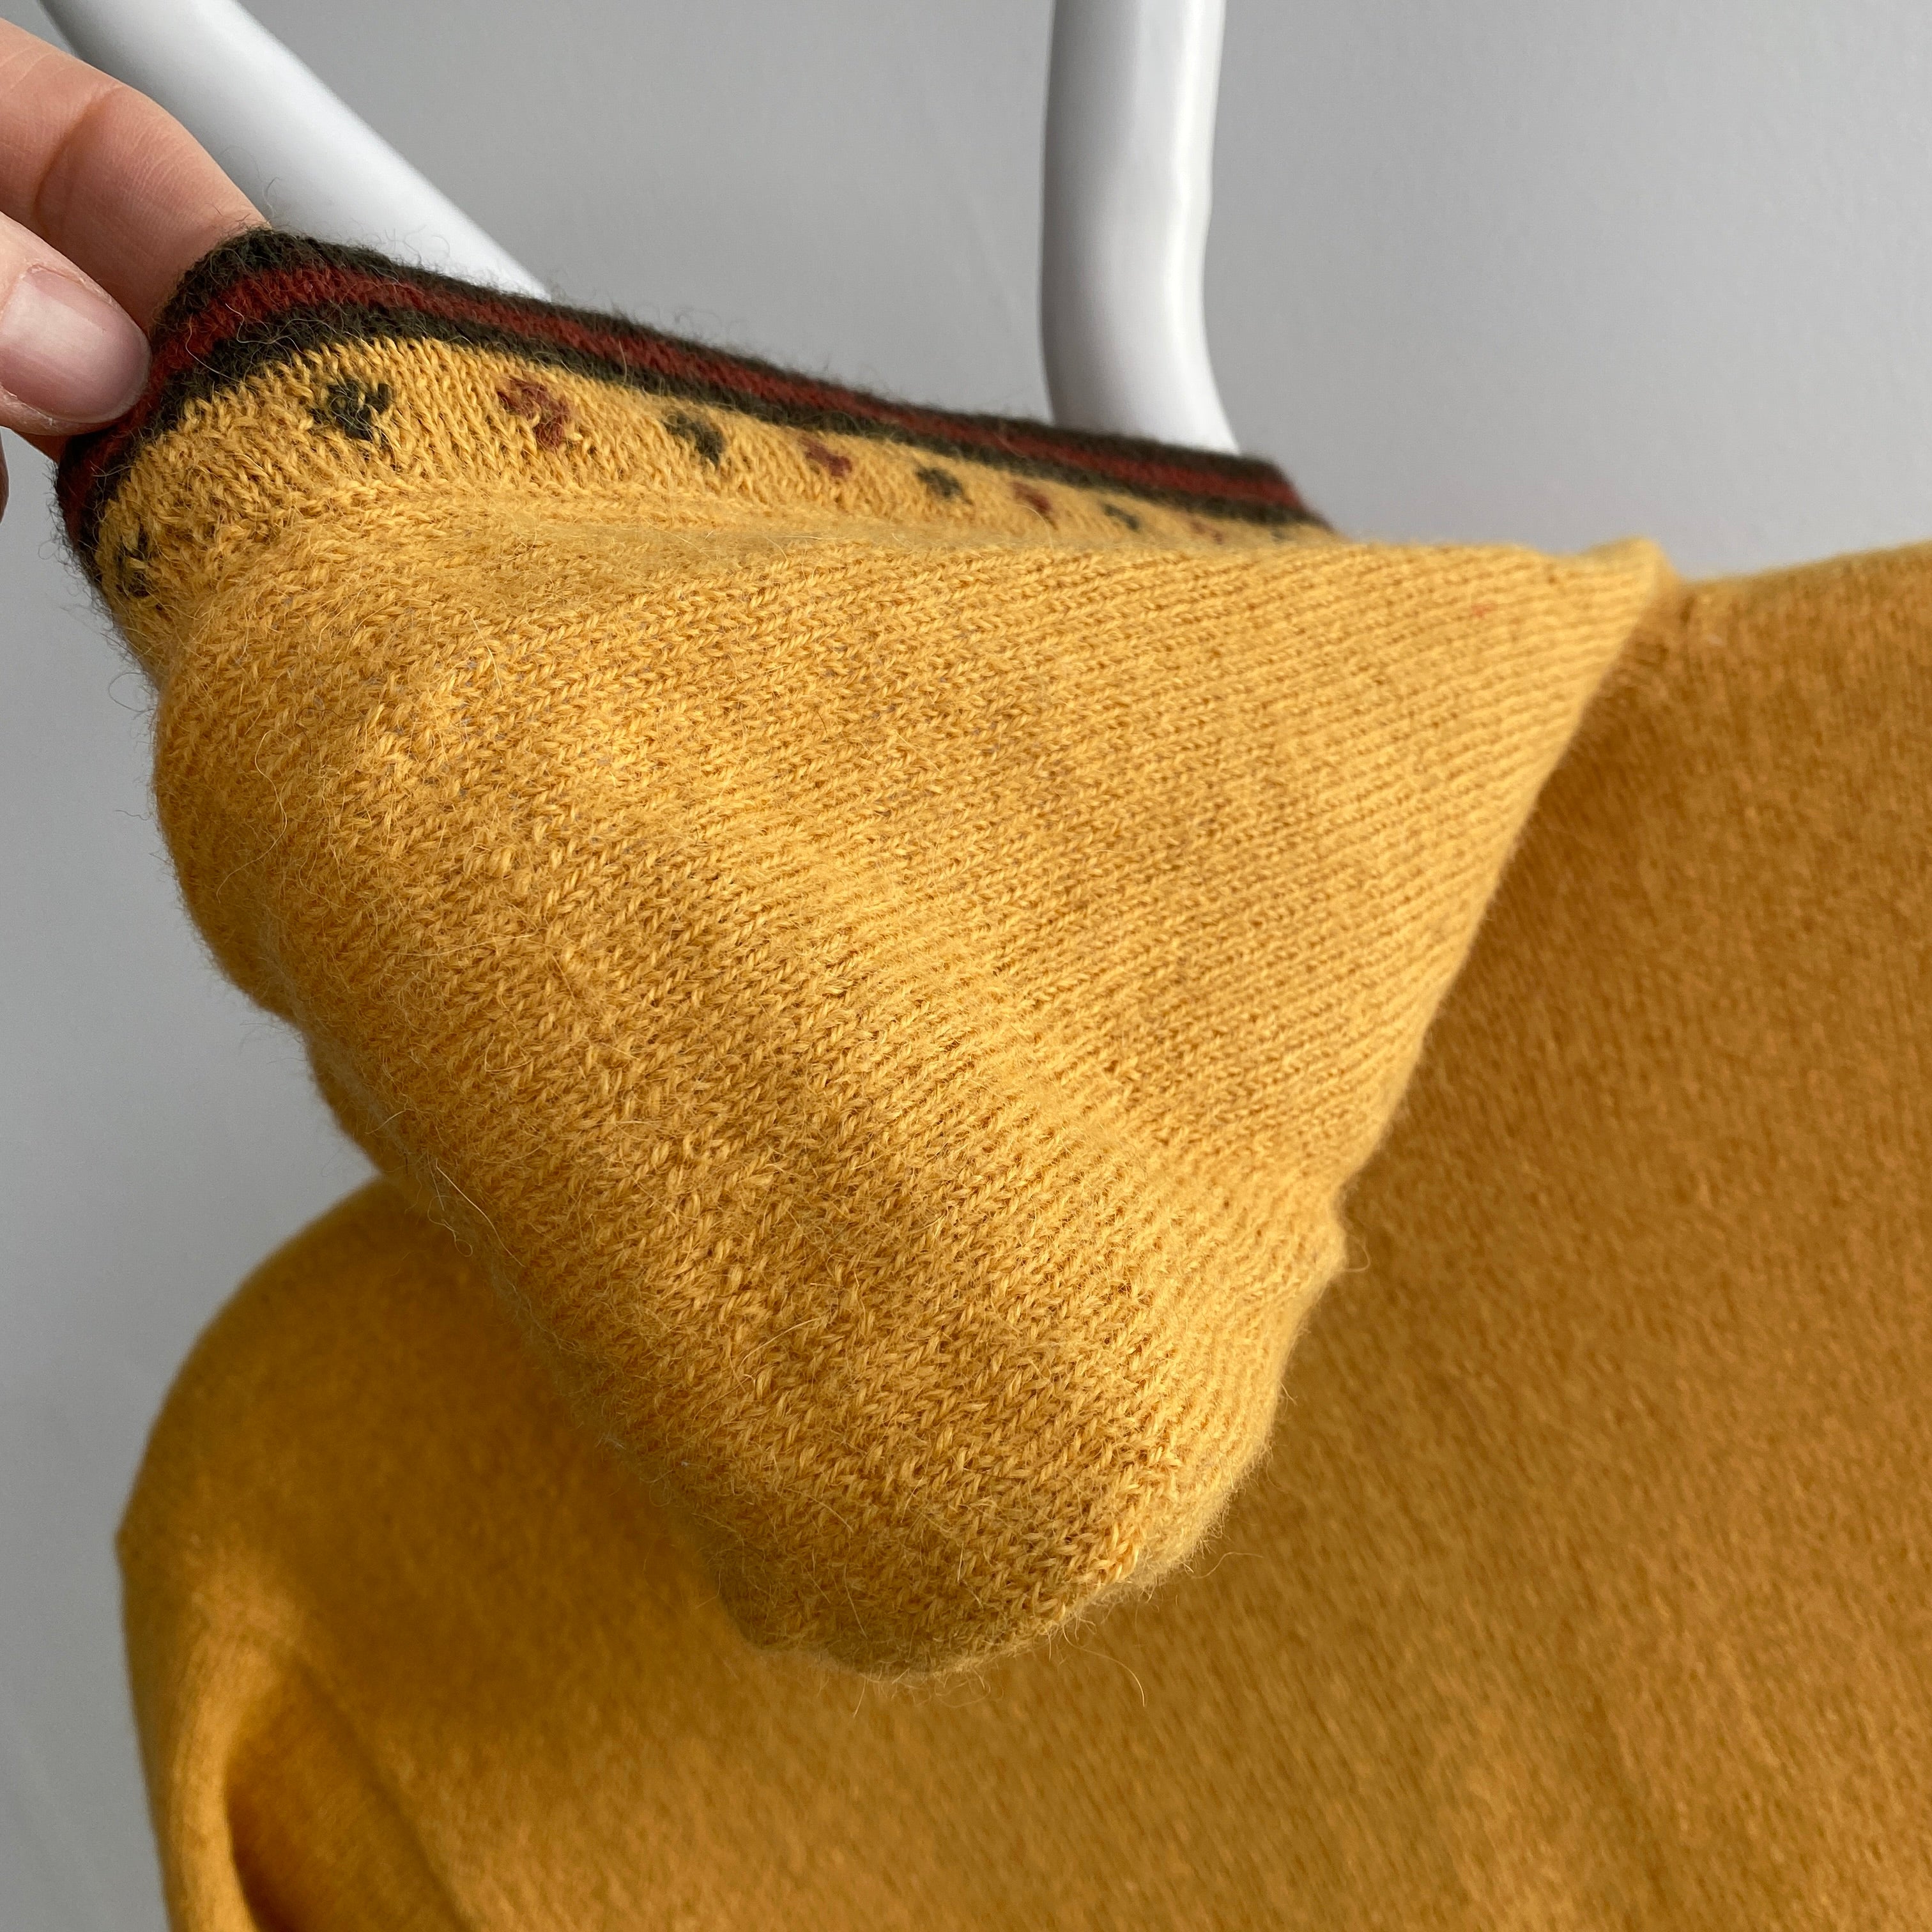 1980s? Cashmere? Mustard Knit Hoodie - WOW